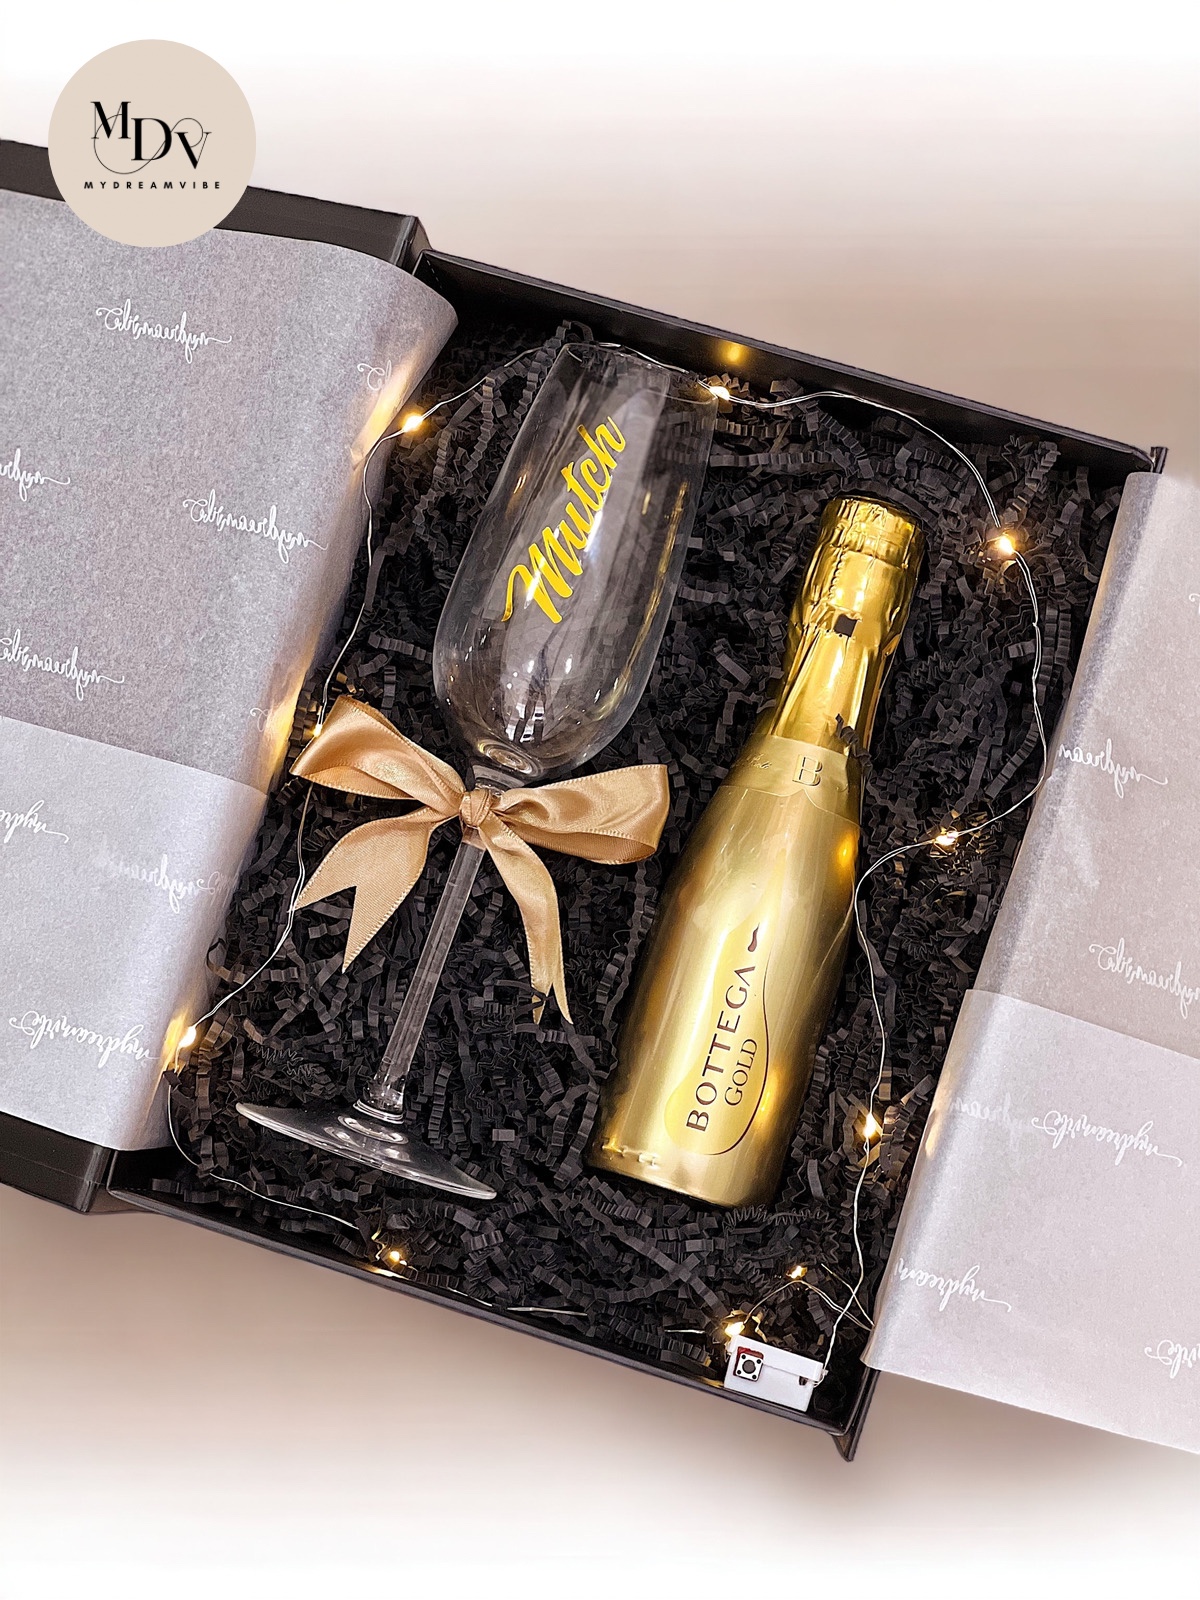 Perfect Champagne Gift - Choice of Moet / Bottega Mini with Champagne Glass